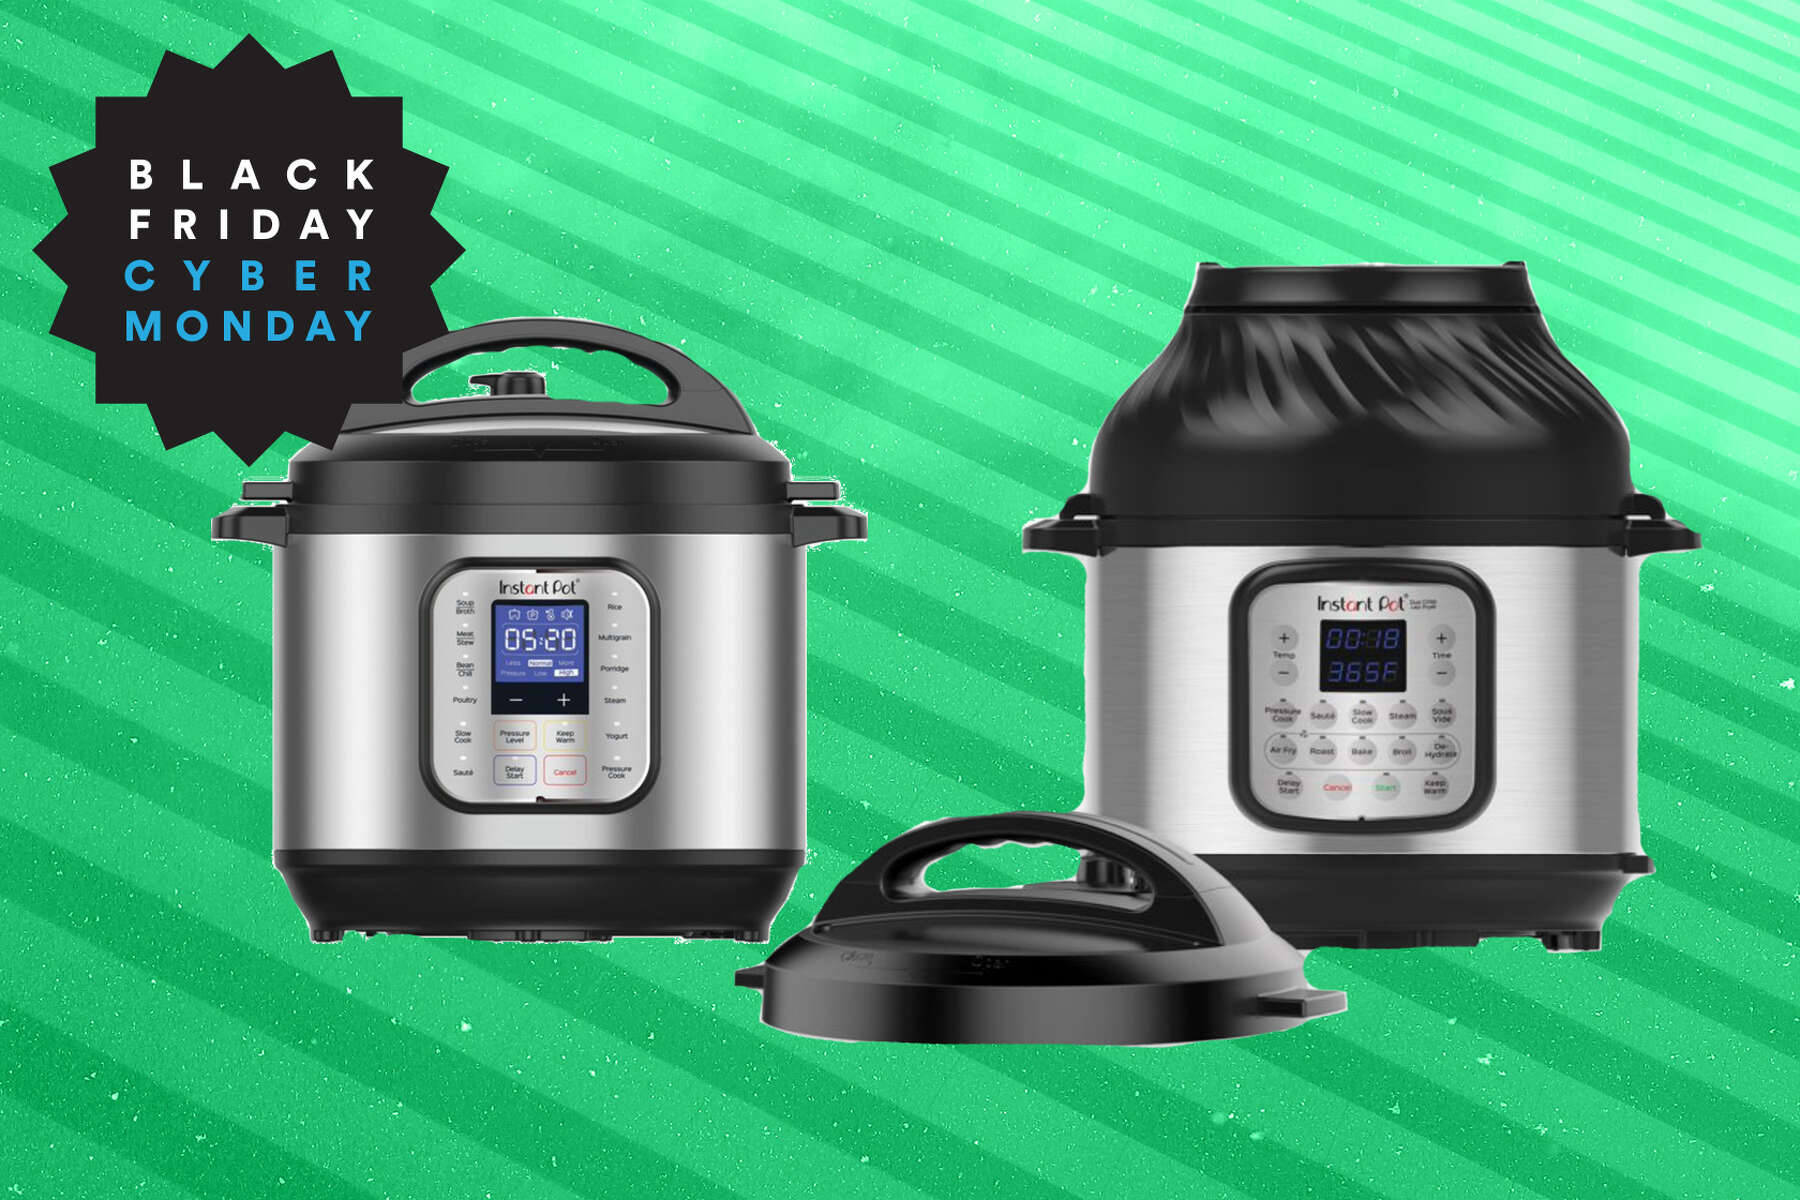 Walmart has Instant Pots starting at $59 for Black Friday